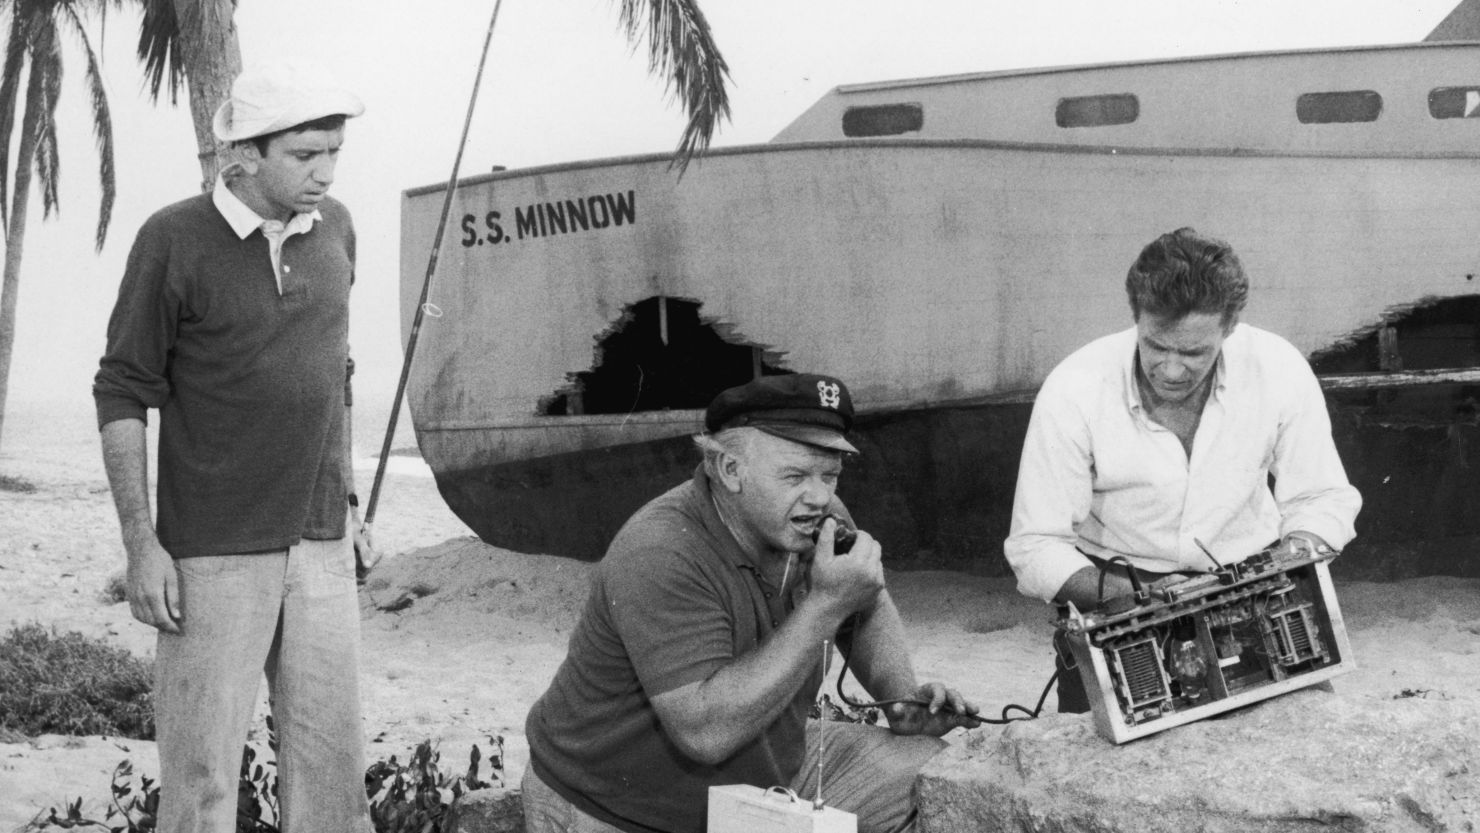 Castaways on Gilligan's Island attempt to use a homemade CB radio to contact civilization after being shipwrecked. 